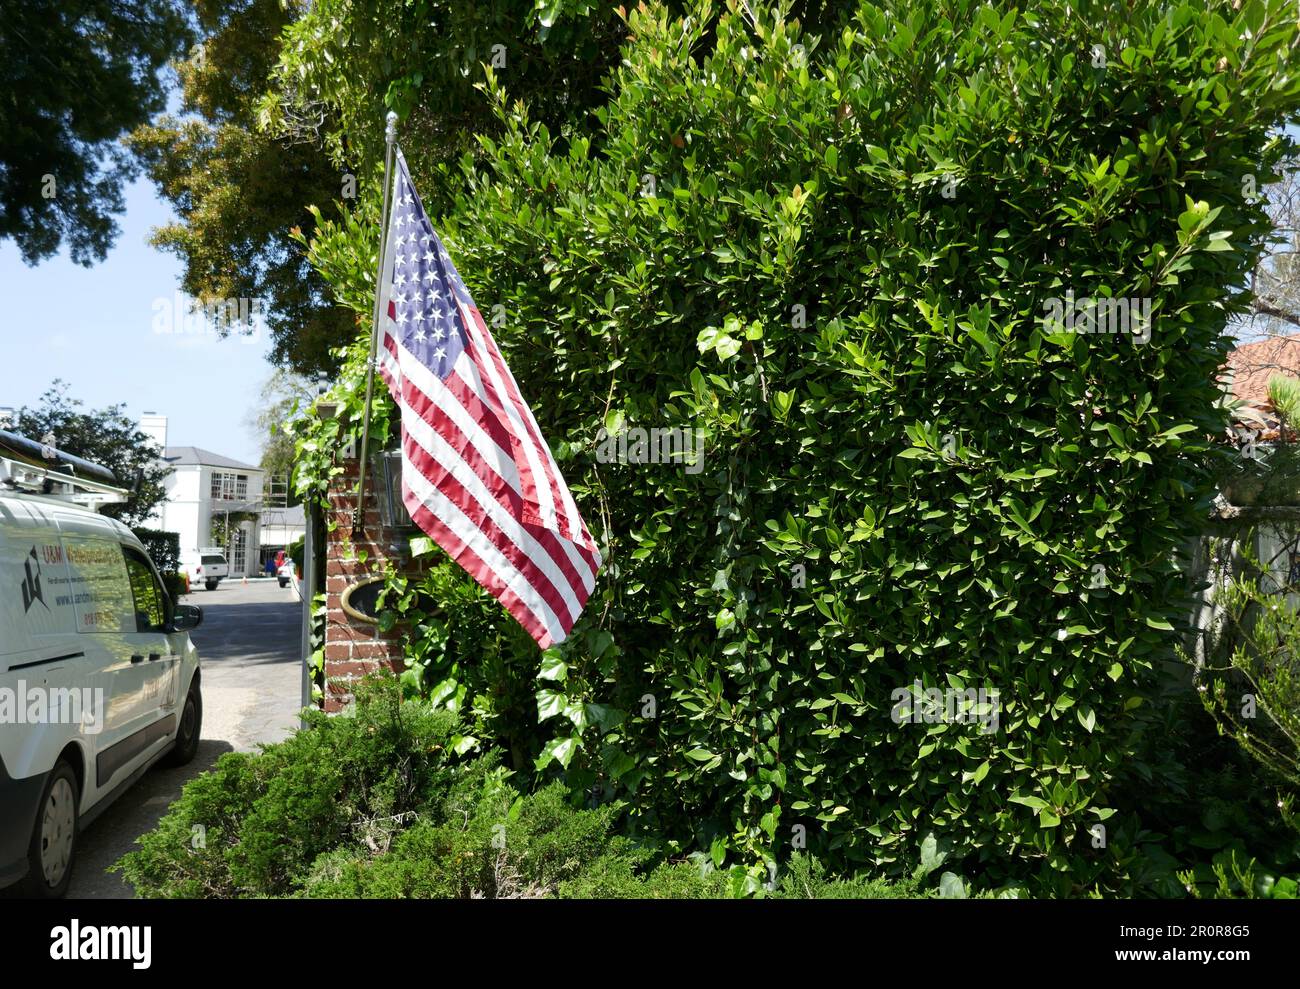 Los Angeles, California, USA 8th May 2023 Actor Tyrone Power and Actor David Niven Former Home/house at 139 N. Saltair Avenue on May 8, 2023 in Los Angeles, California, USA. Photo by Barry King/Alamy Stock Photo Stock Photo